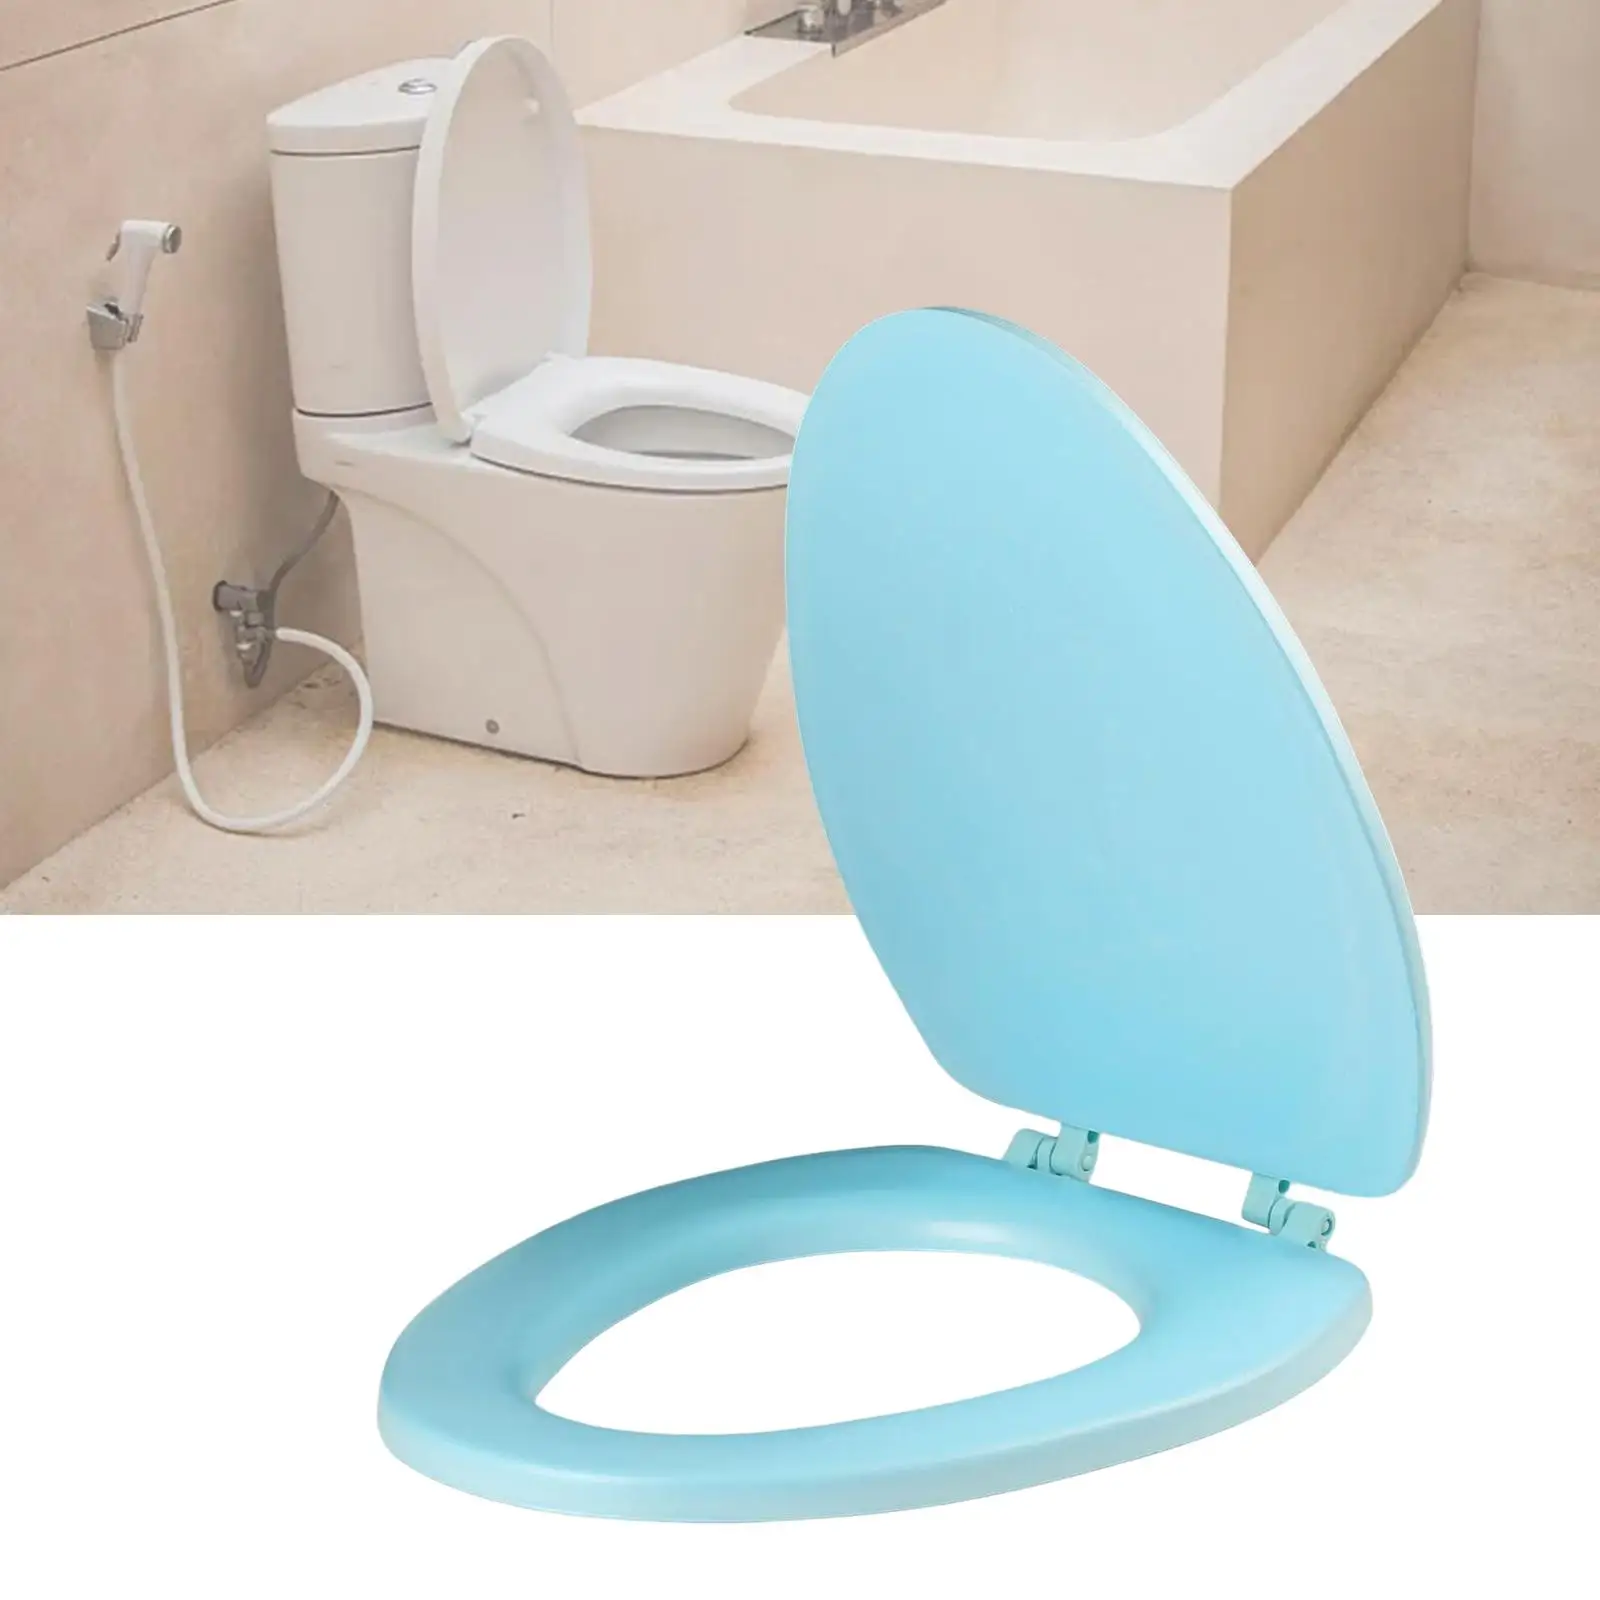 Toilet Cover Cushion and Lid Durable Accessory Bathroom Supplies Easily Clean and Install Soft Pad Removable Waterproof Washable